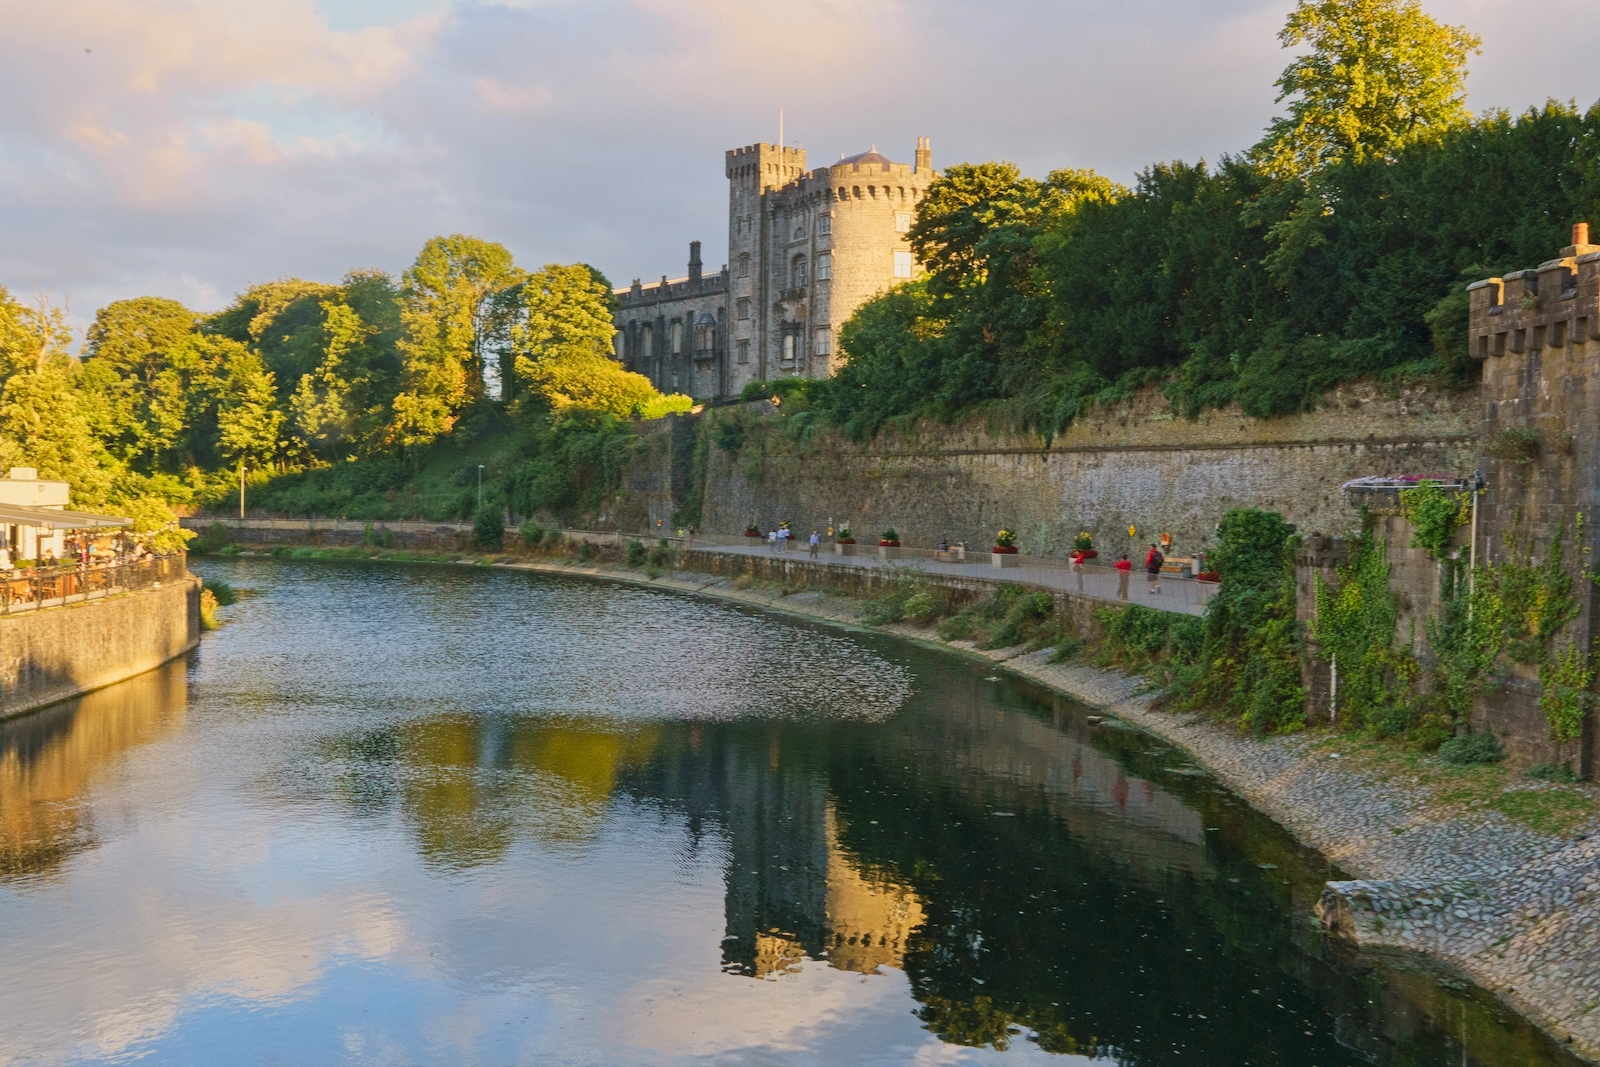 kilkenny-castle-on-the-banks-of-the-river-nore-[late-evening-in-august-2018]-227081-excellent